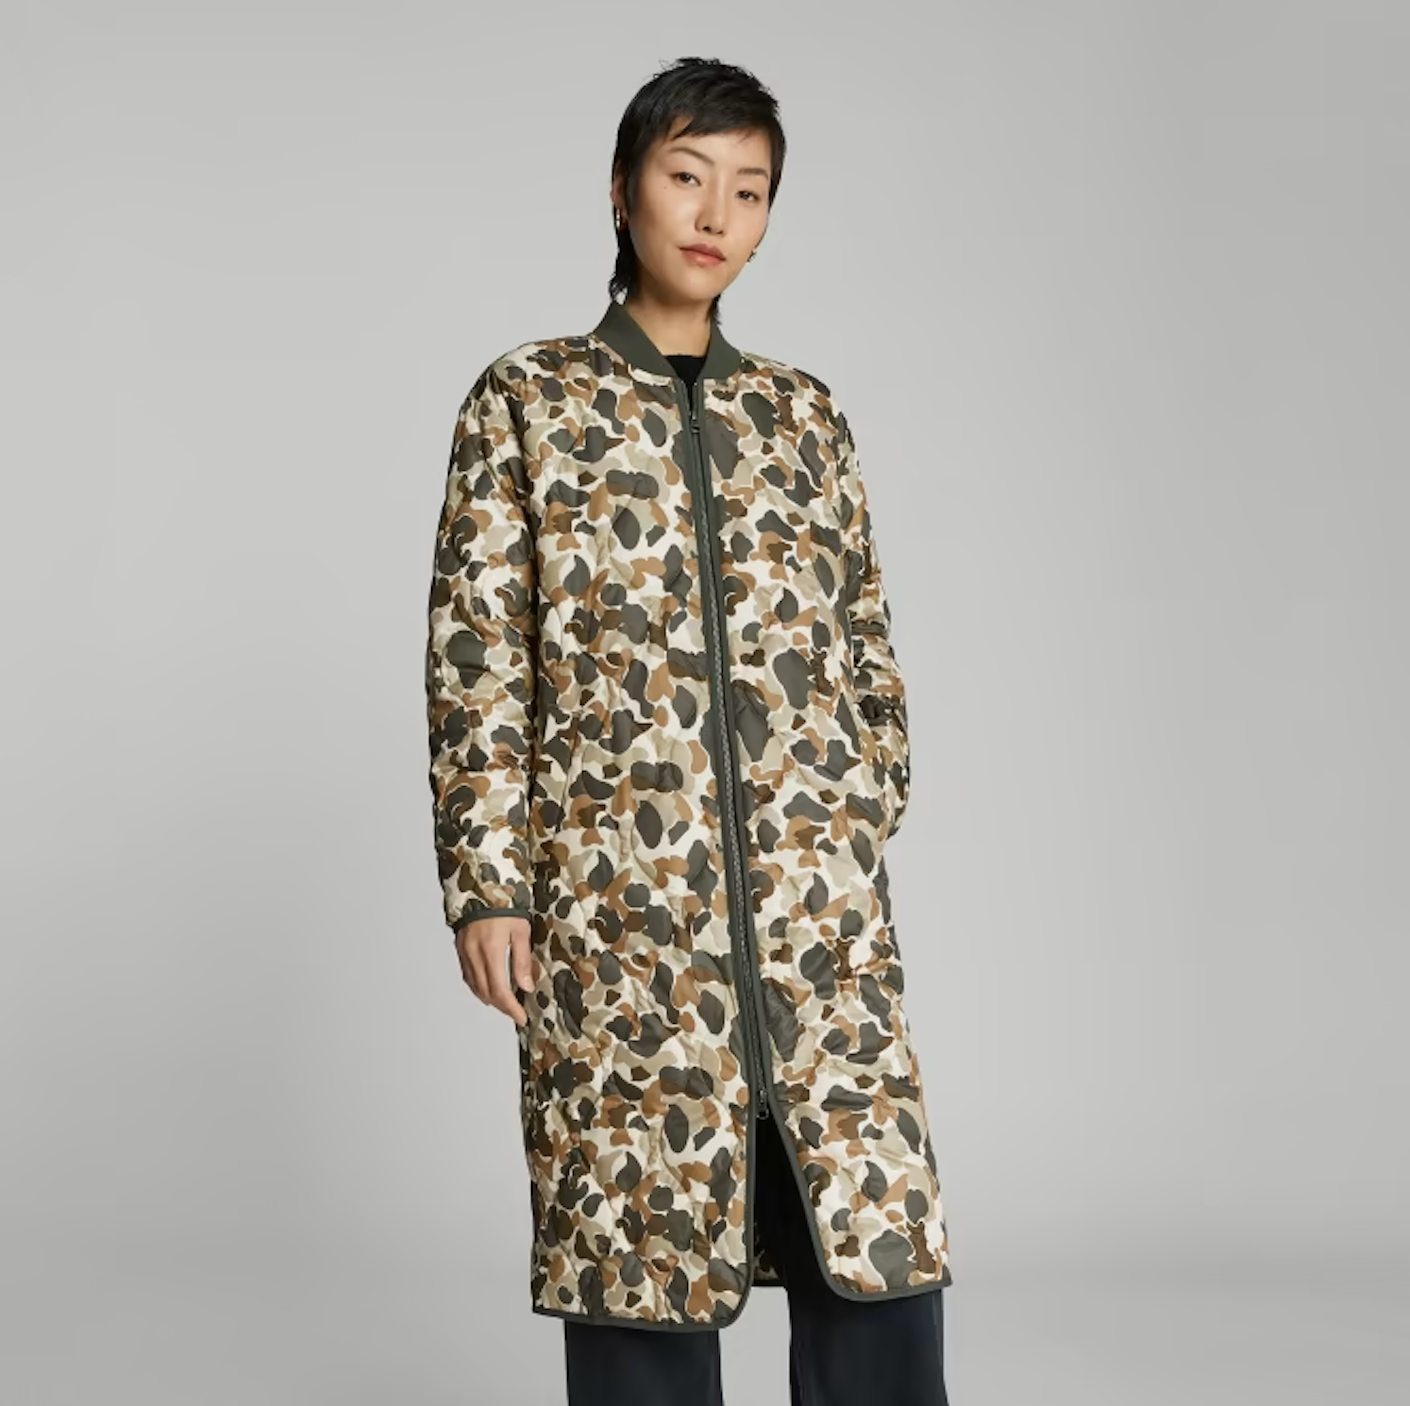 A woman wears a long, midweight, quilted coat with blobby, green, white, and brown camo print.